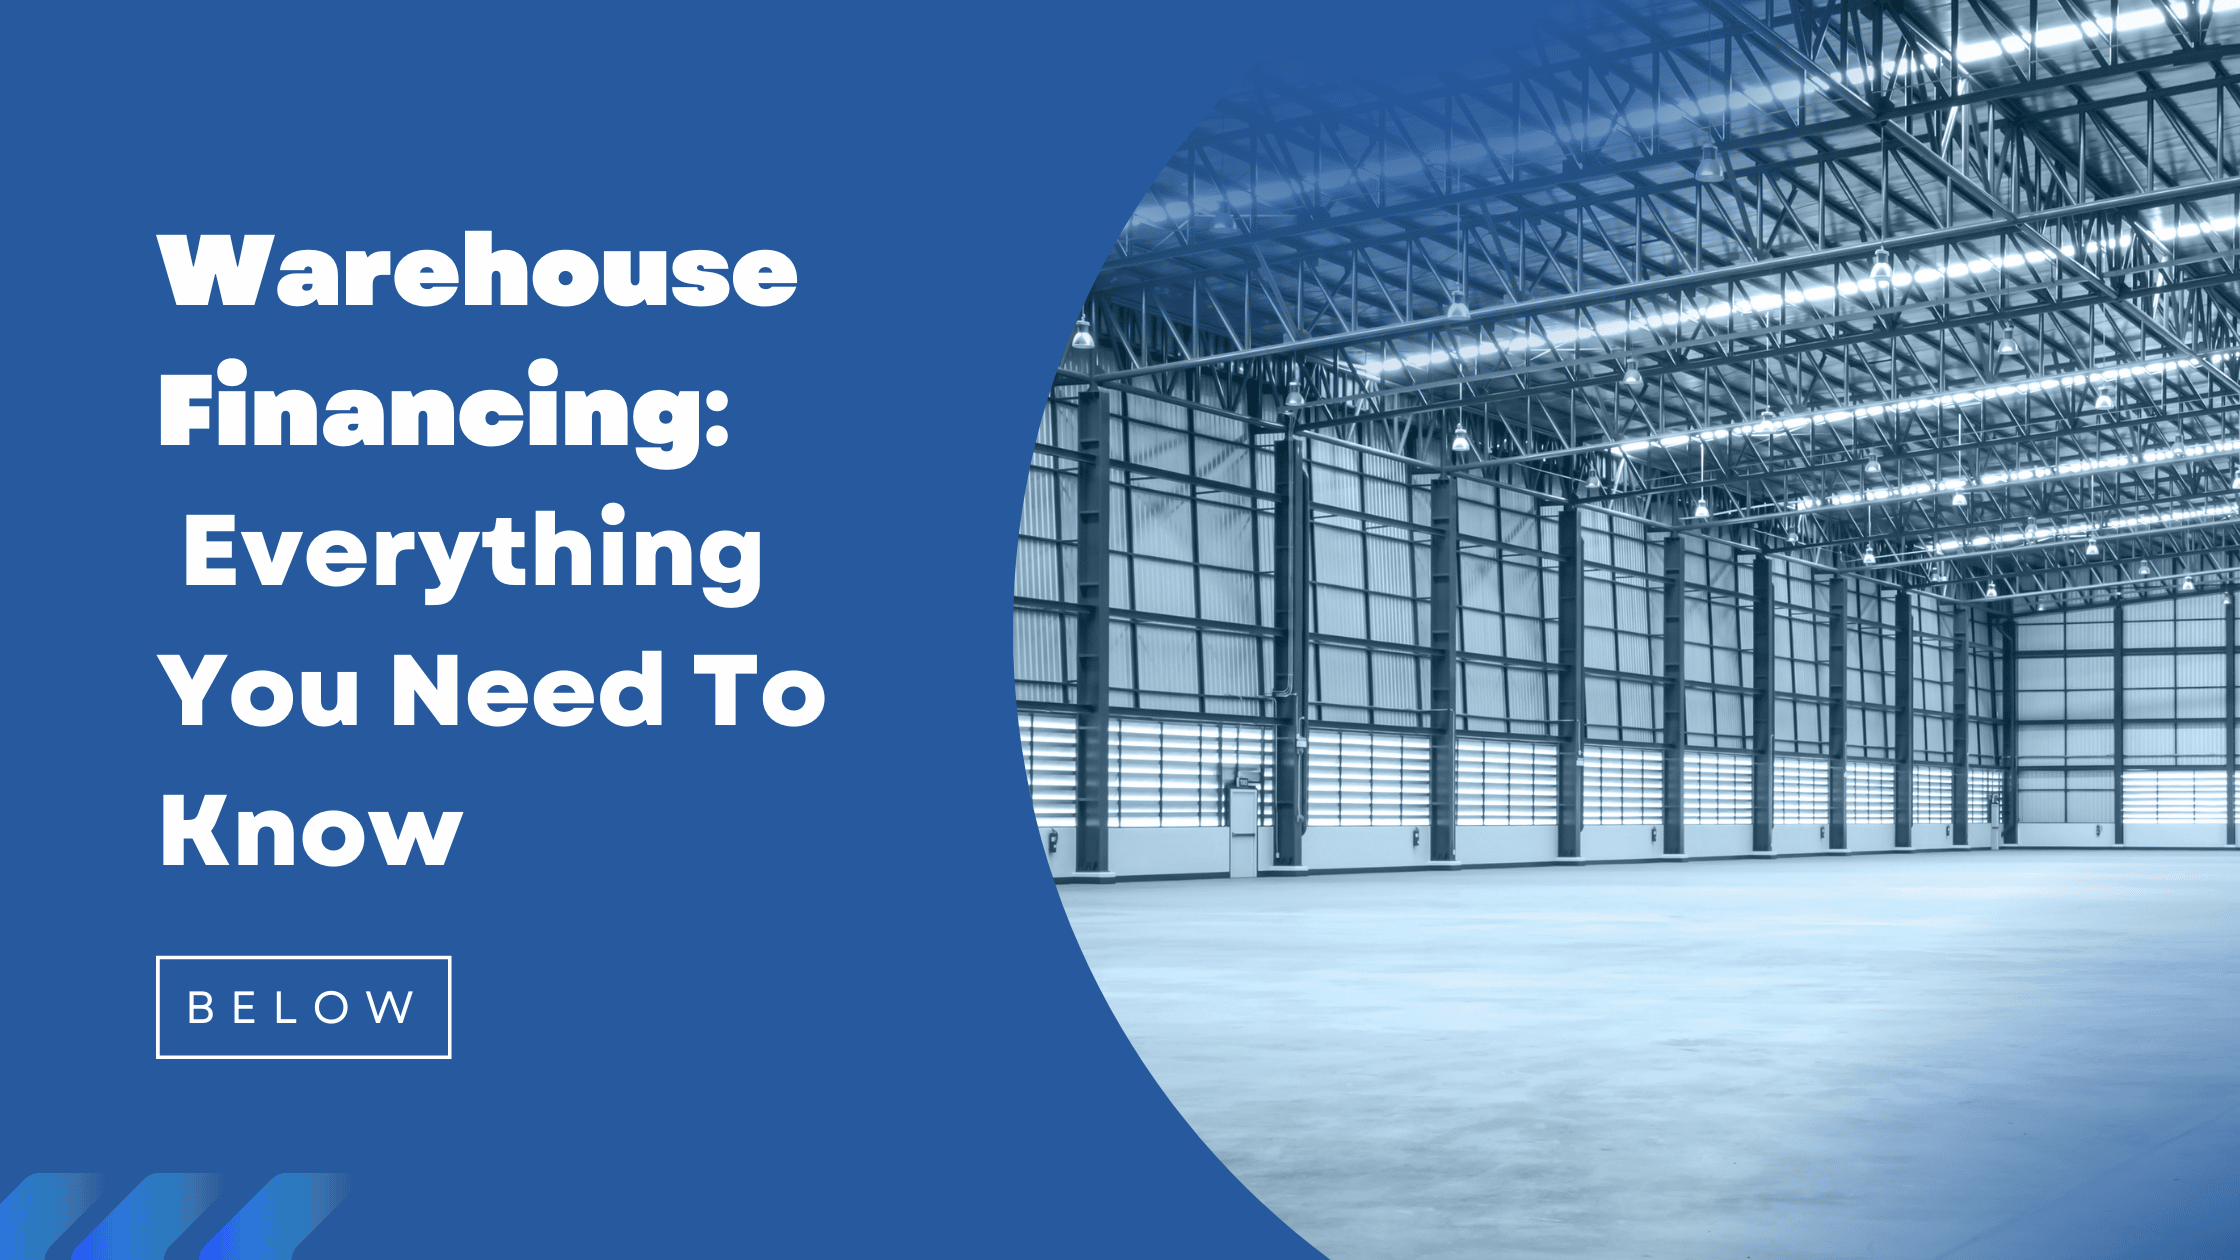 Everything you need to know about Warehouse FInancing